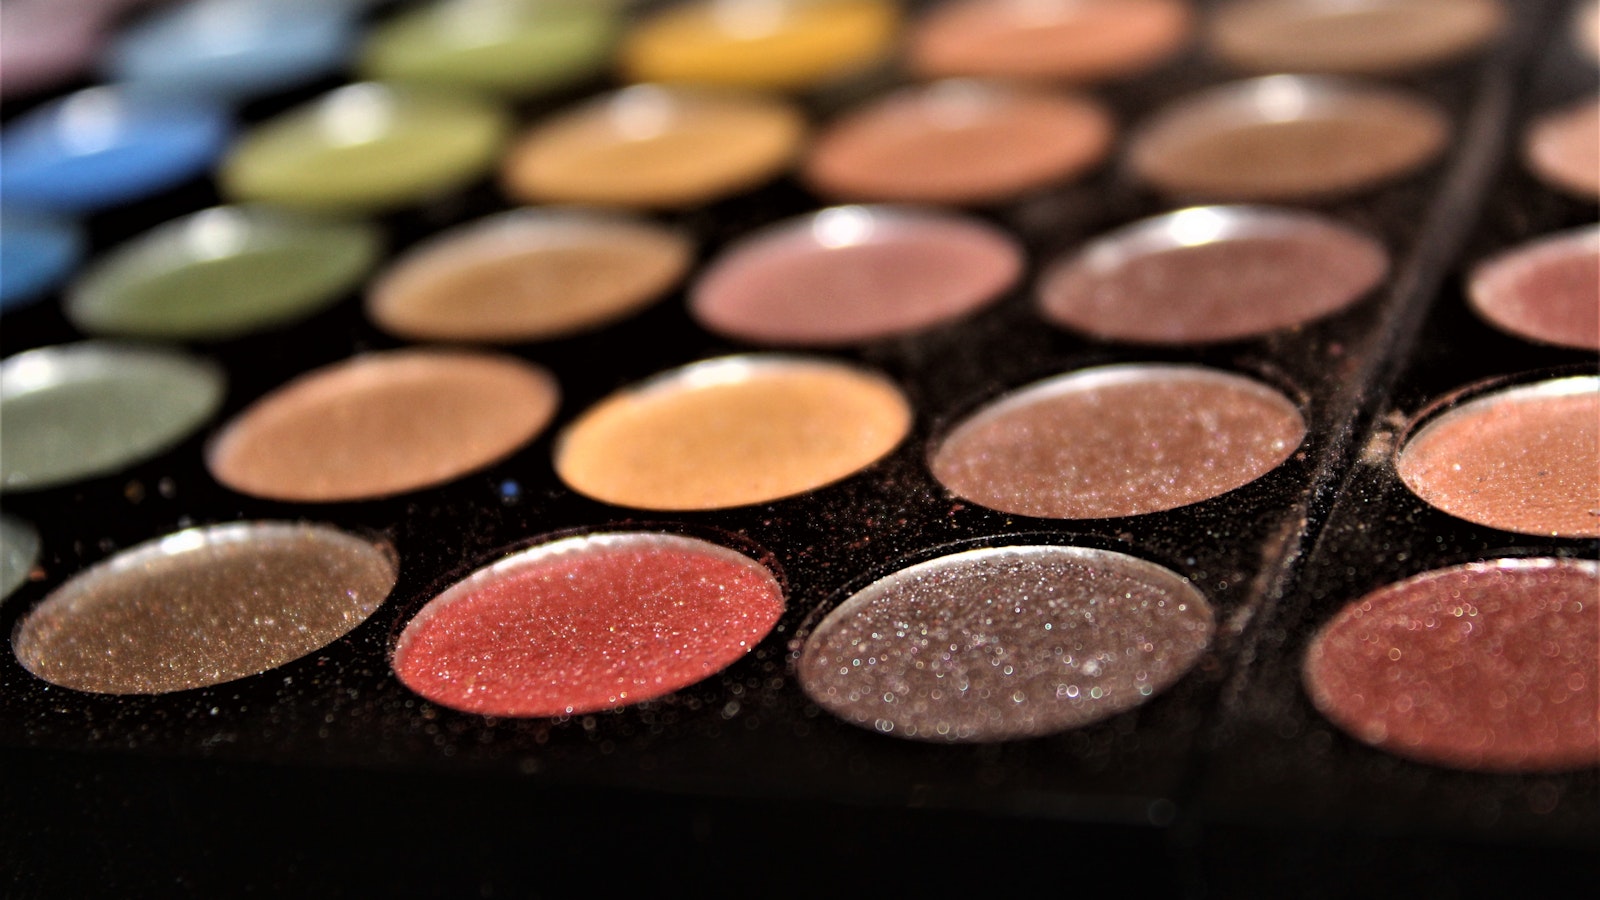 12 Of The Best Travel Palettes For A Holiday Make-Up Look